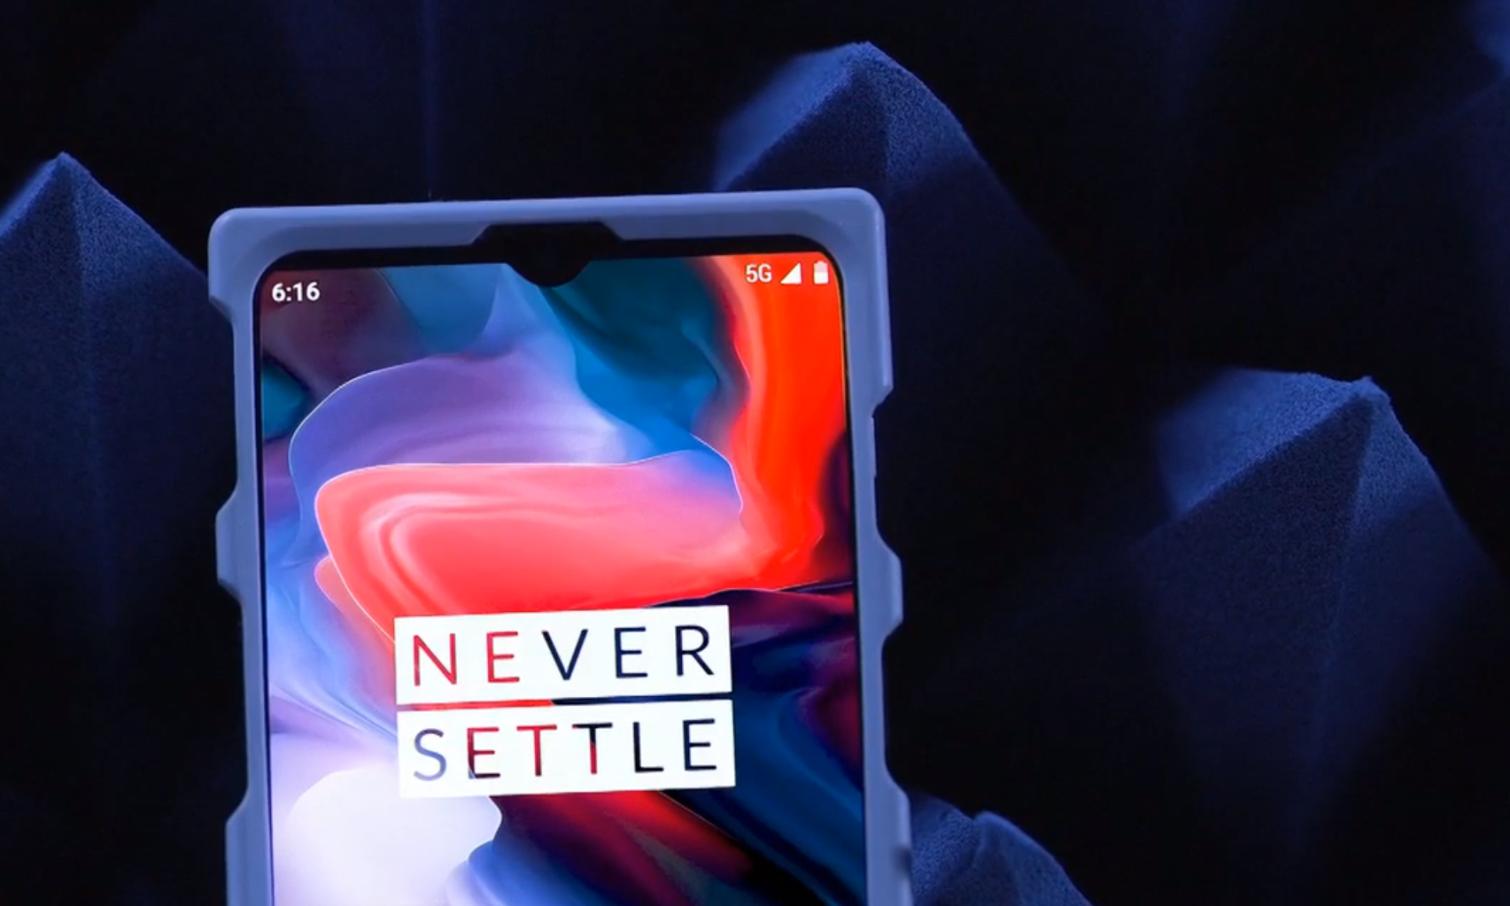 OnePlus Walks Back Comments About Having First Snapdragon 855 Phone